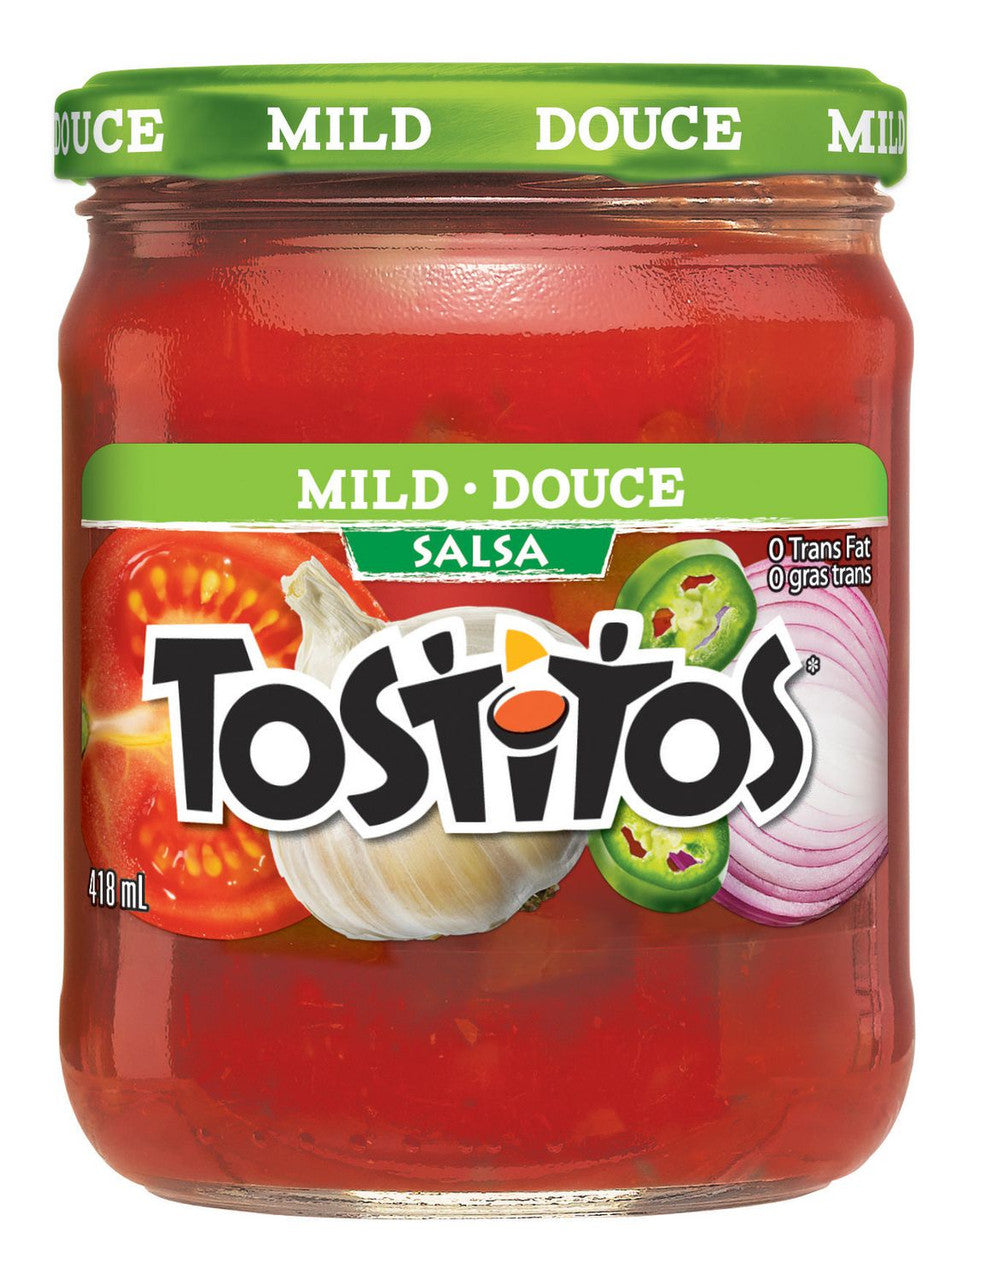 Tostitos Mild Salsa Dip, 418ml/14.1 oz., {Imported from Canada}